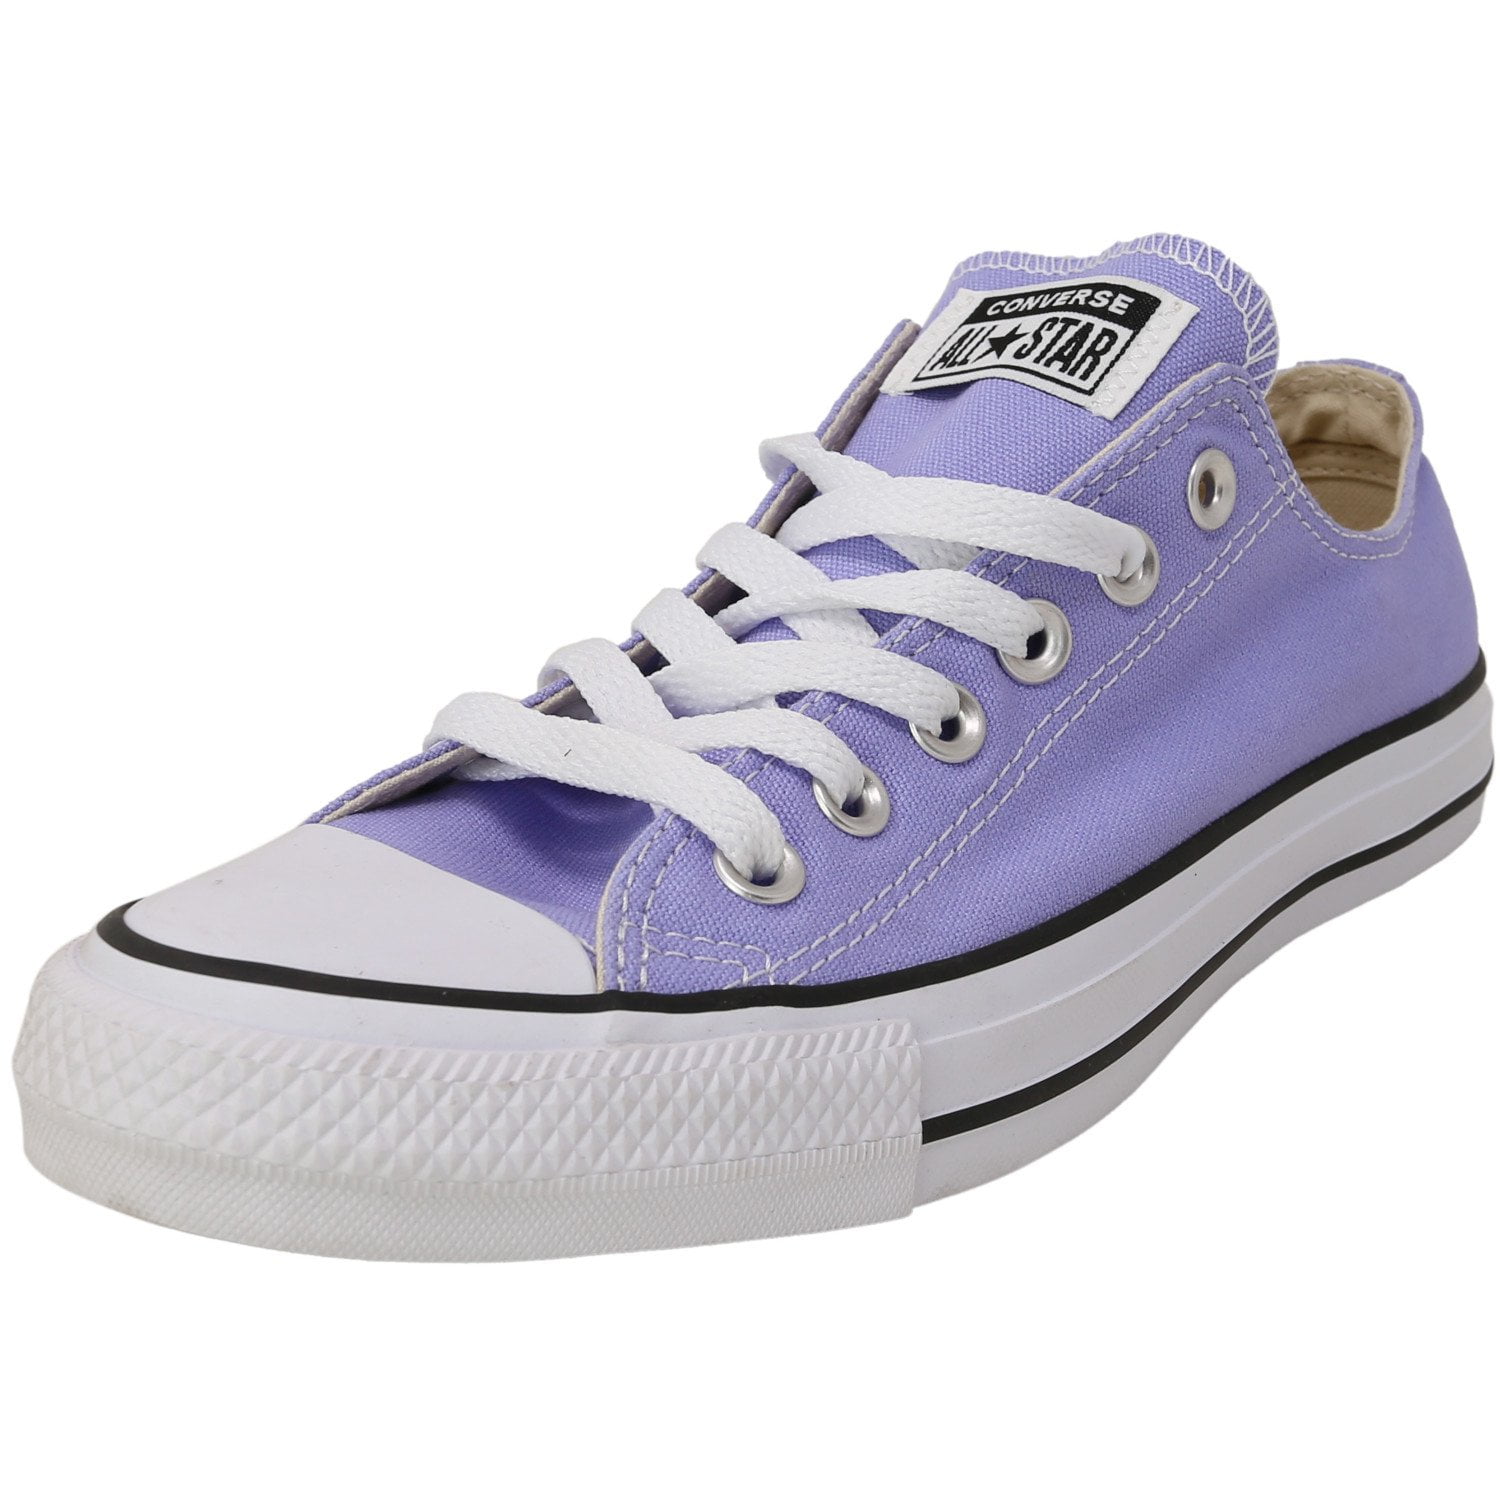 Converse Chuck Taylor All Star Ox Navy Ankle-High Fashion Sneaker